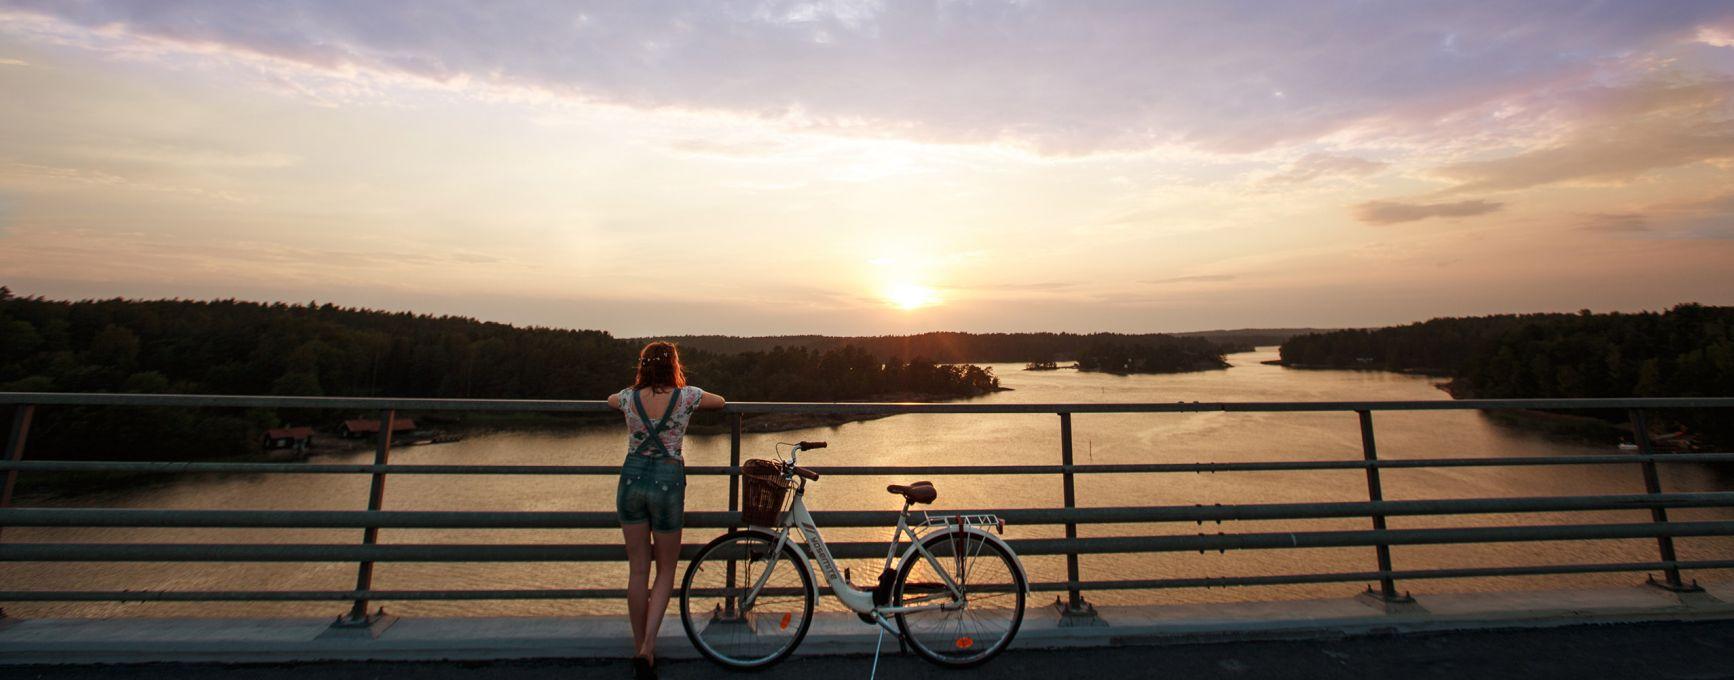 A woman stands, beside her bicycle, on a bridge in the Finnish Archipelago, looking at a sunset.